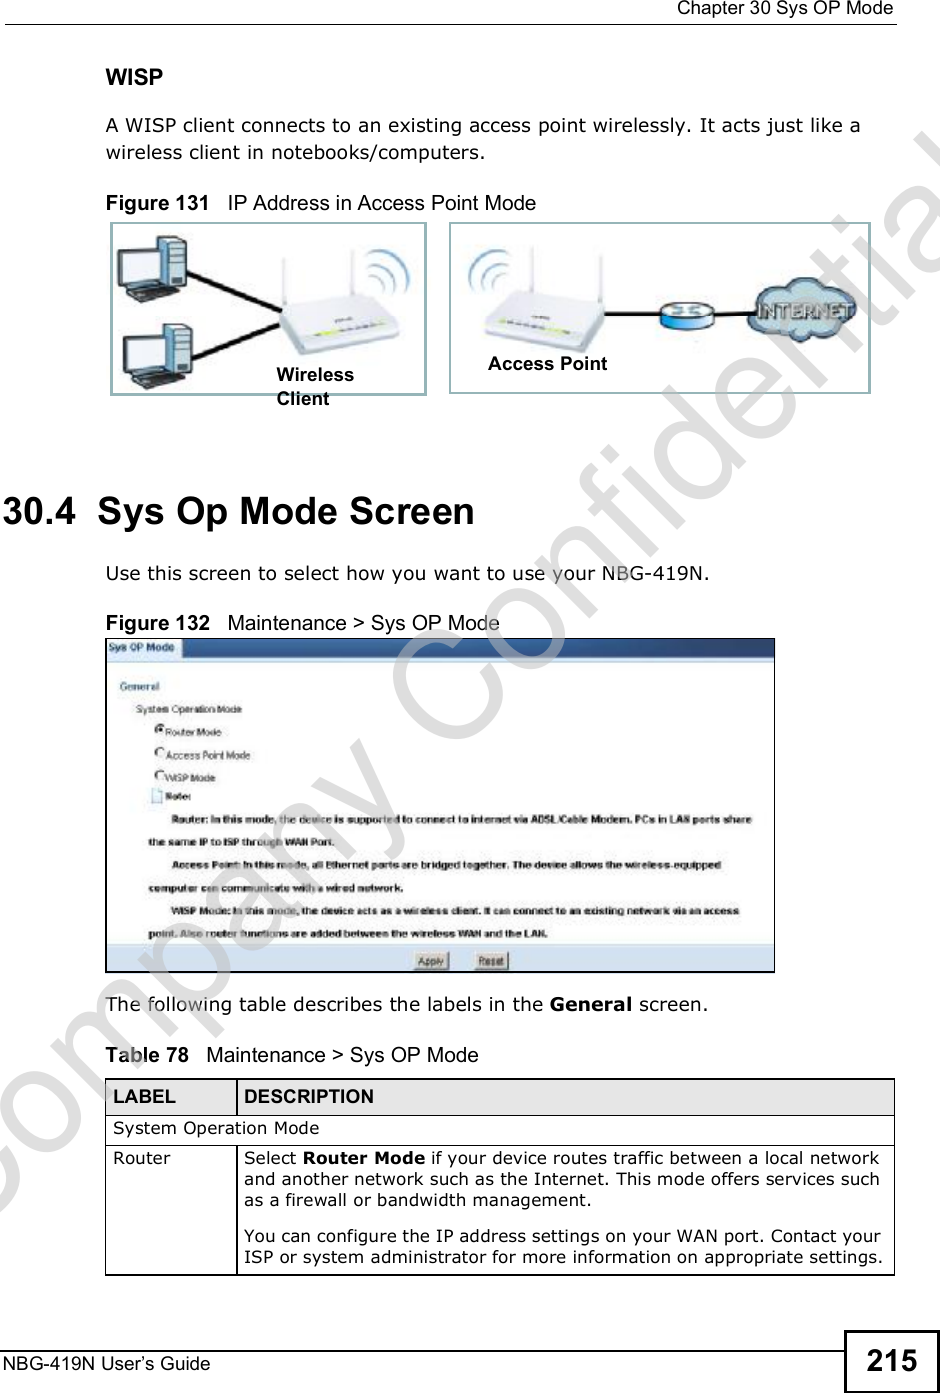  Chapter 30Sys OP ModeNBG-419N User s Guide 215WISPA WISP client connects to an existing access point wirelessly. It acts just like a wireless client in notebooks/computers.  Figure 131   IP Address in Access Point Mode30.4  Sys Op Mode ScreenUse this screen to select how you want to use your NBG-419N. Figure 132   Maintenance &gt; Sys OP Mode The following table describes the labels in the General screen.Table 78   Maintenance &gt; Sys OP Mode Access PointWirelessClientLABEL DESCRIPTIONSystem Operation ModeRouter  Select Router Mode if your device routes traffic between a local network and another network such as the Internet. This mode offers services such as a firewall or bandwidth management.You can configure the IP address settings on your WAN port. Contact your ISP or system administrator for more information on appropriate settings.Company Confidential